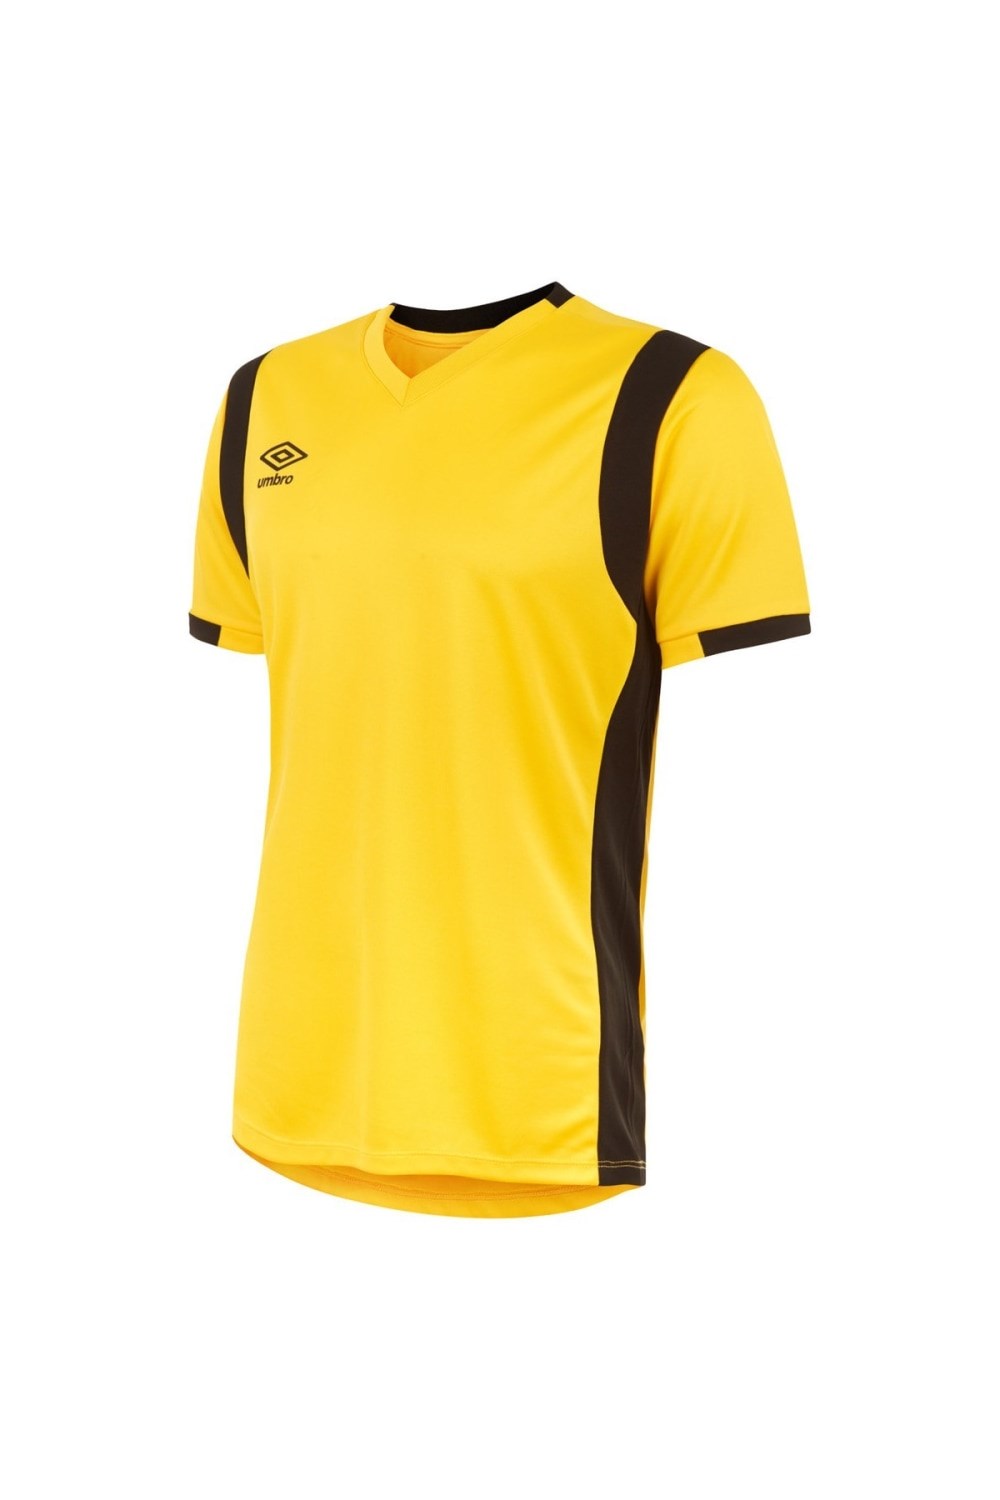 Yellow Black Soccer Jersey Vector Images (over 360)